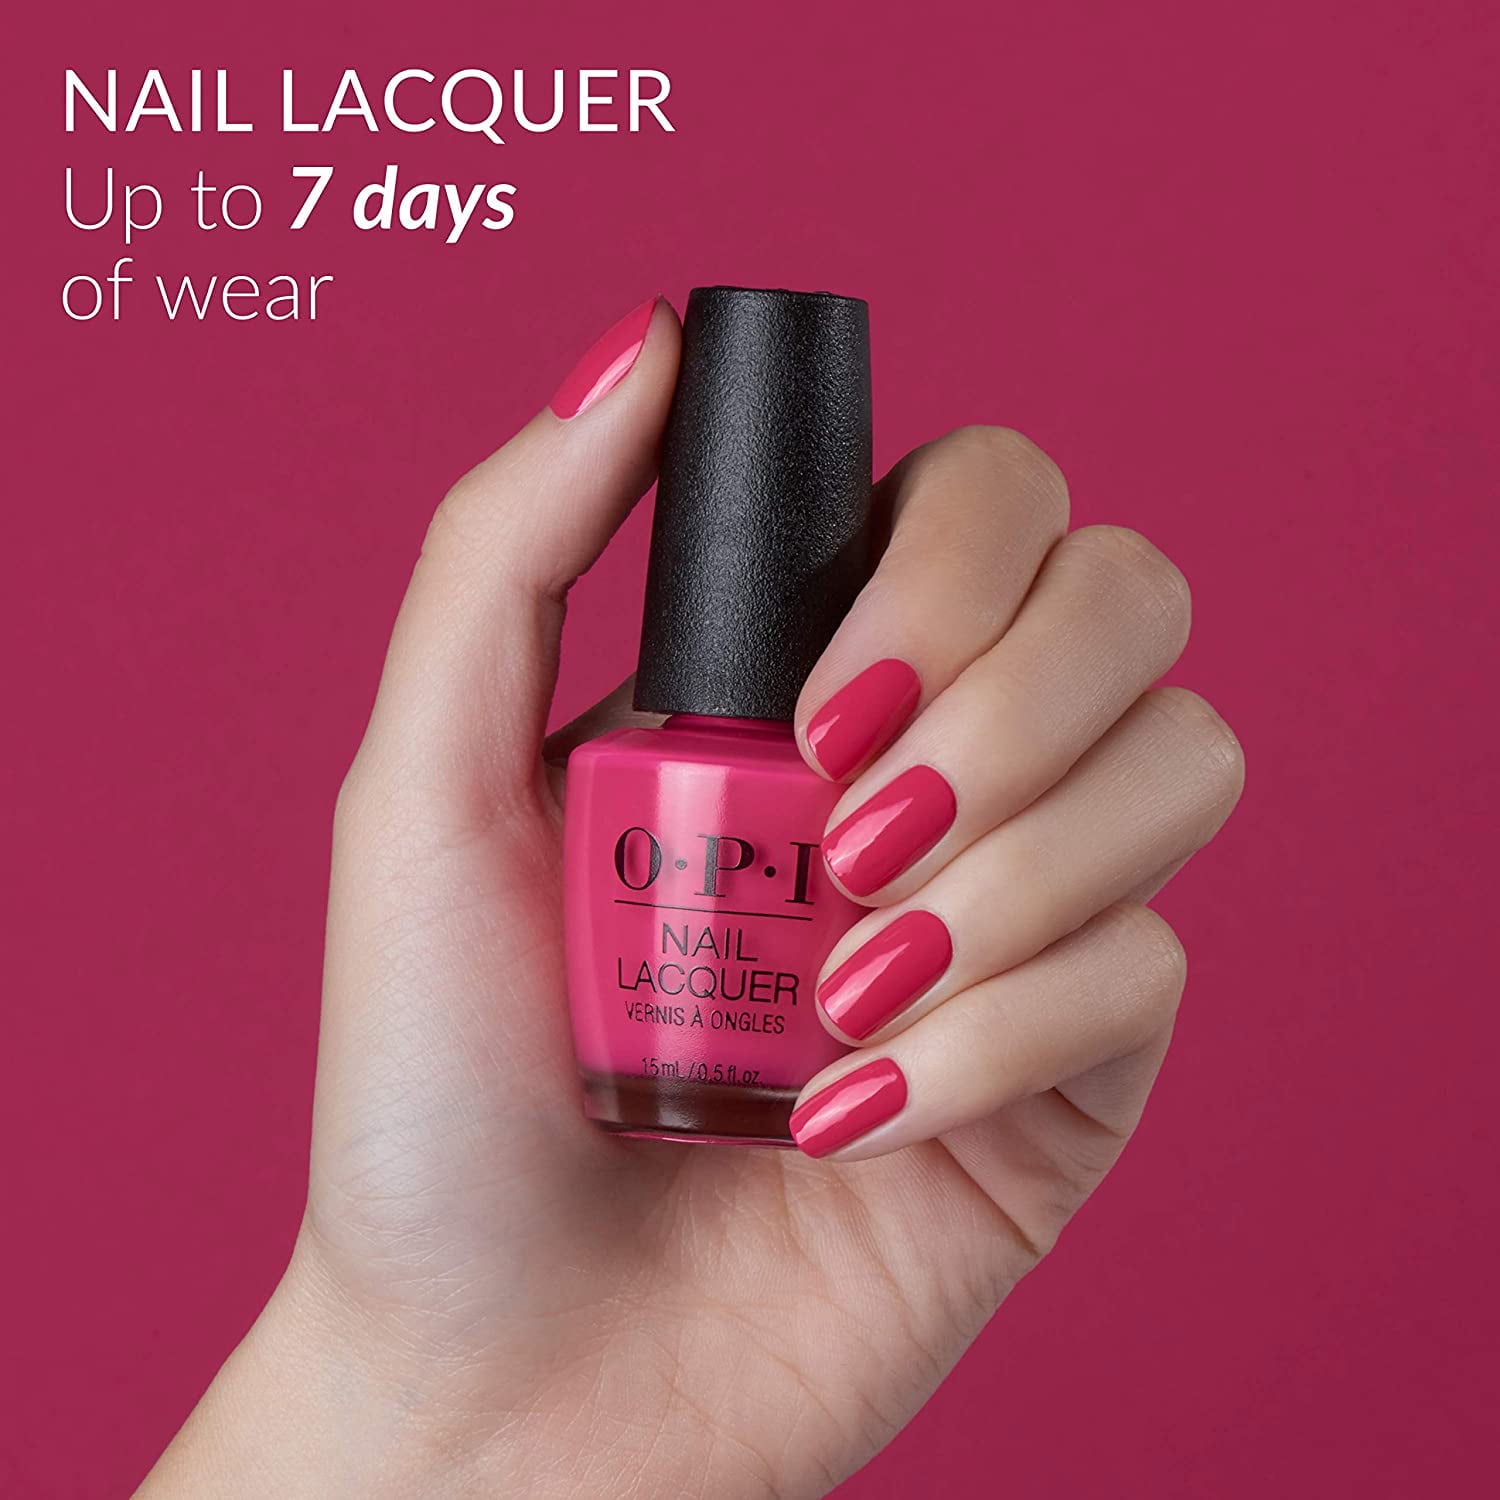 Discover the Vibrant Colors of OPI's Malibu Summer 2021 Collection